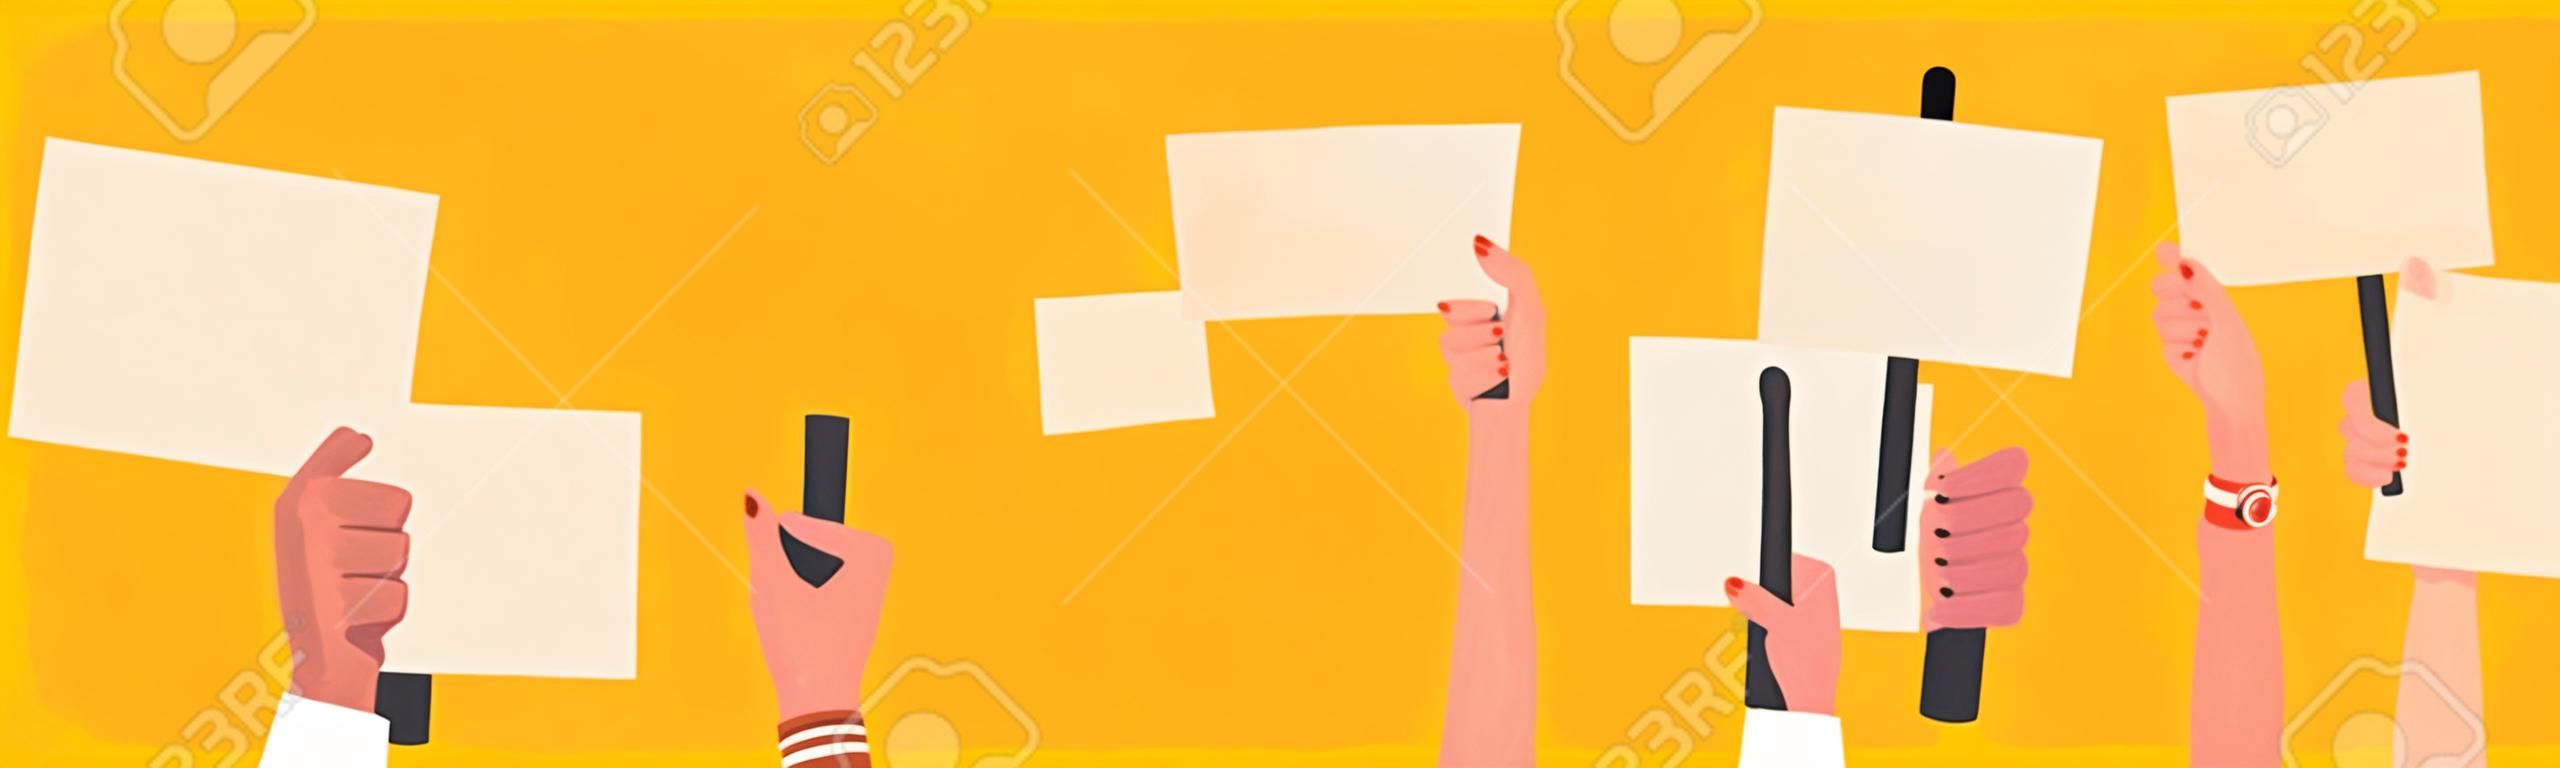 Hands holding empty blank placards and megaphones on demonstration. People with protests banners and empty vote signs. Election and protest concept campaig. Vector illustration.